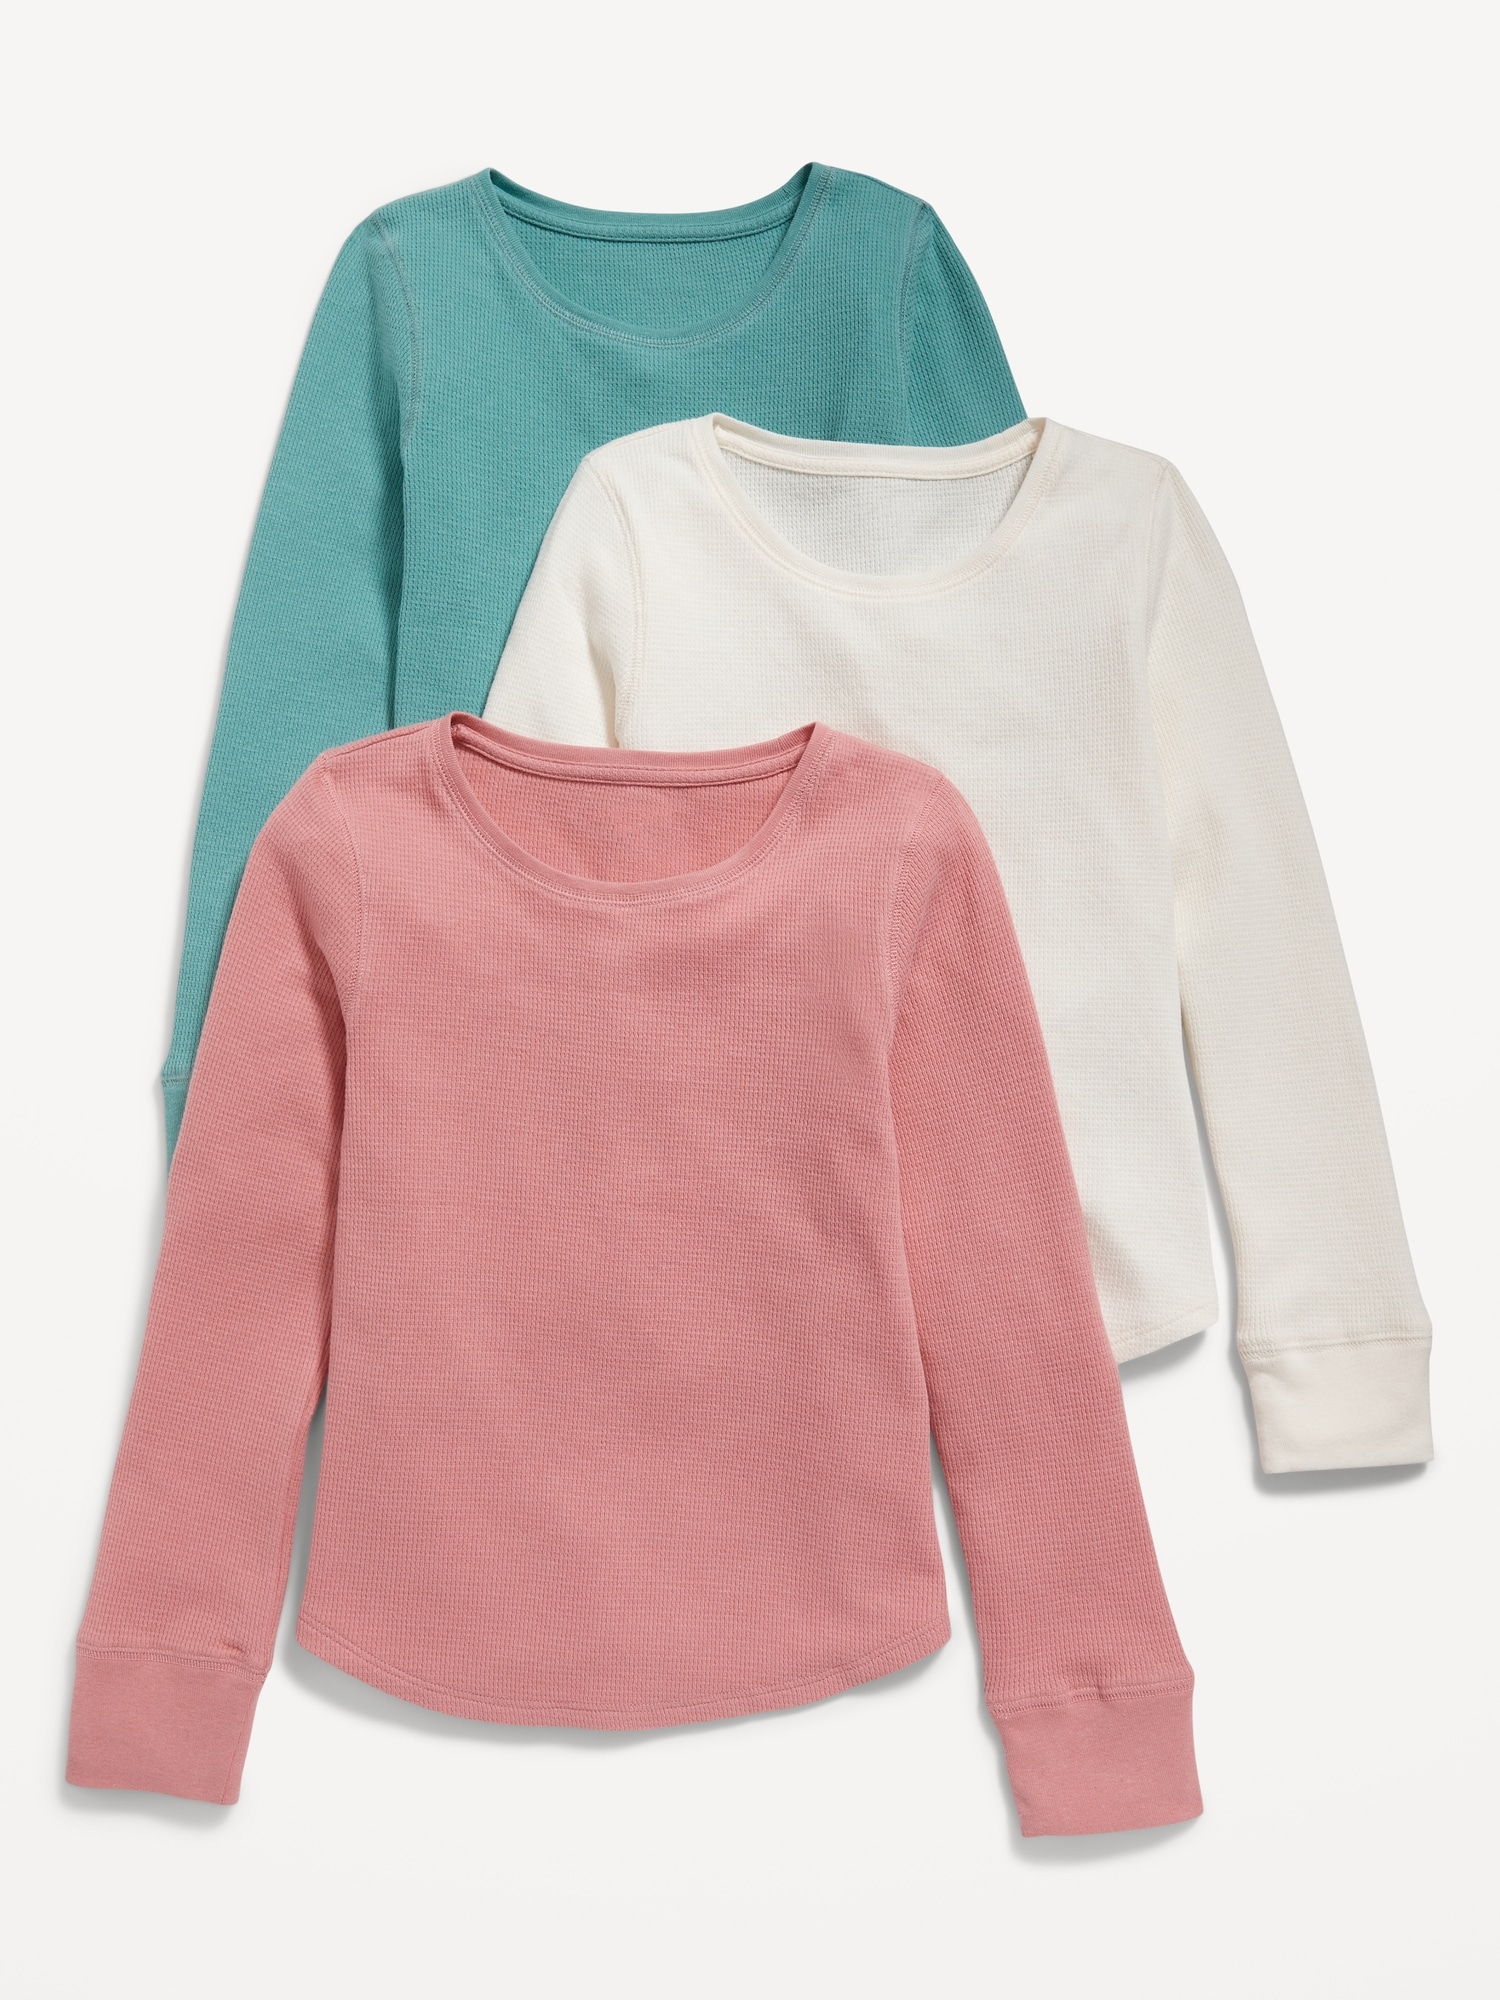 Long-Sleeve Thermal-Knit T-Shirt 3-Pack for Girls